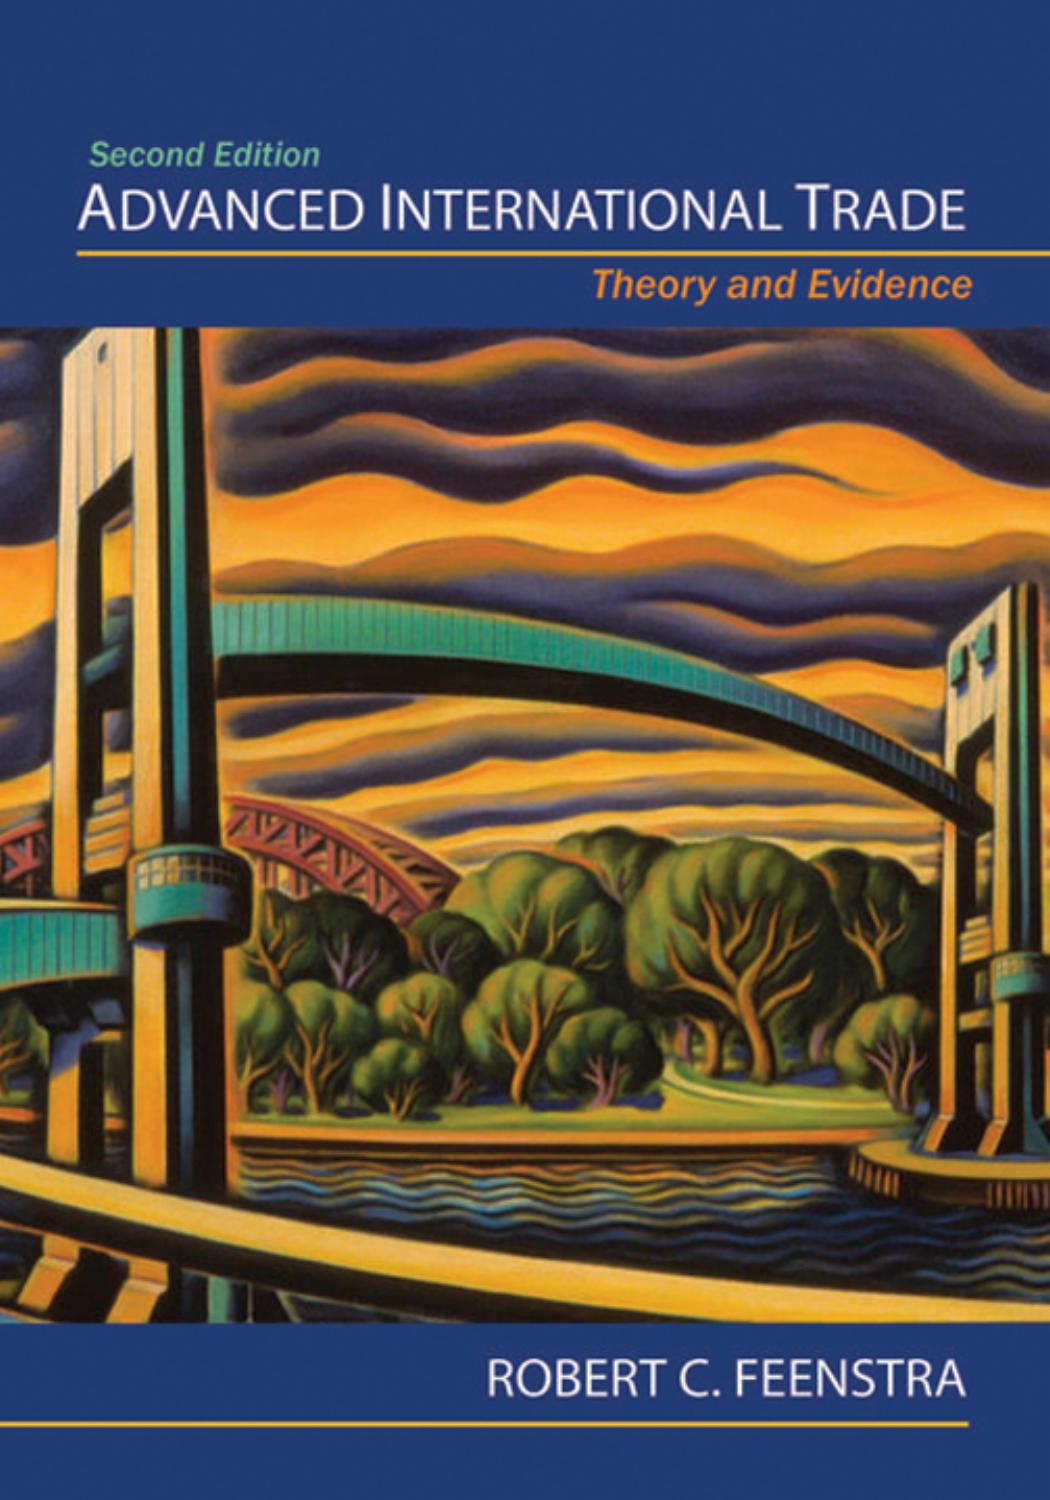 Advanced International Trade Theory and Evidence 2nd Edition by Robert C. Feenstra